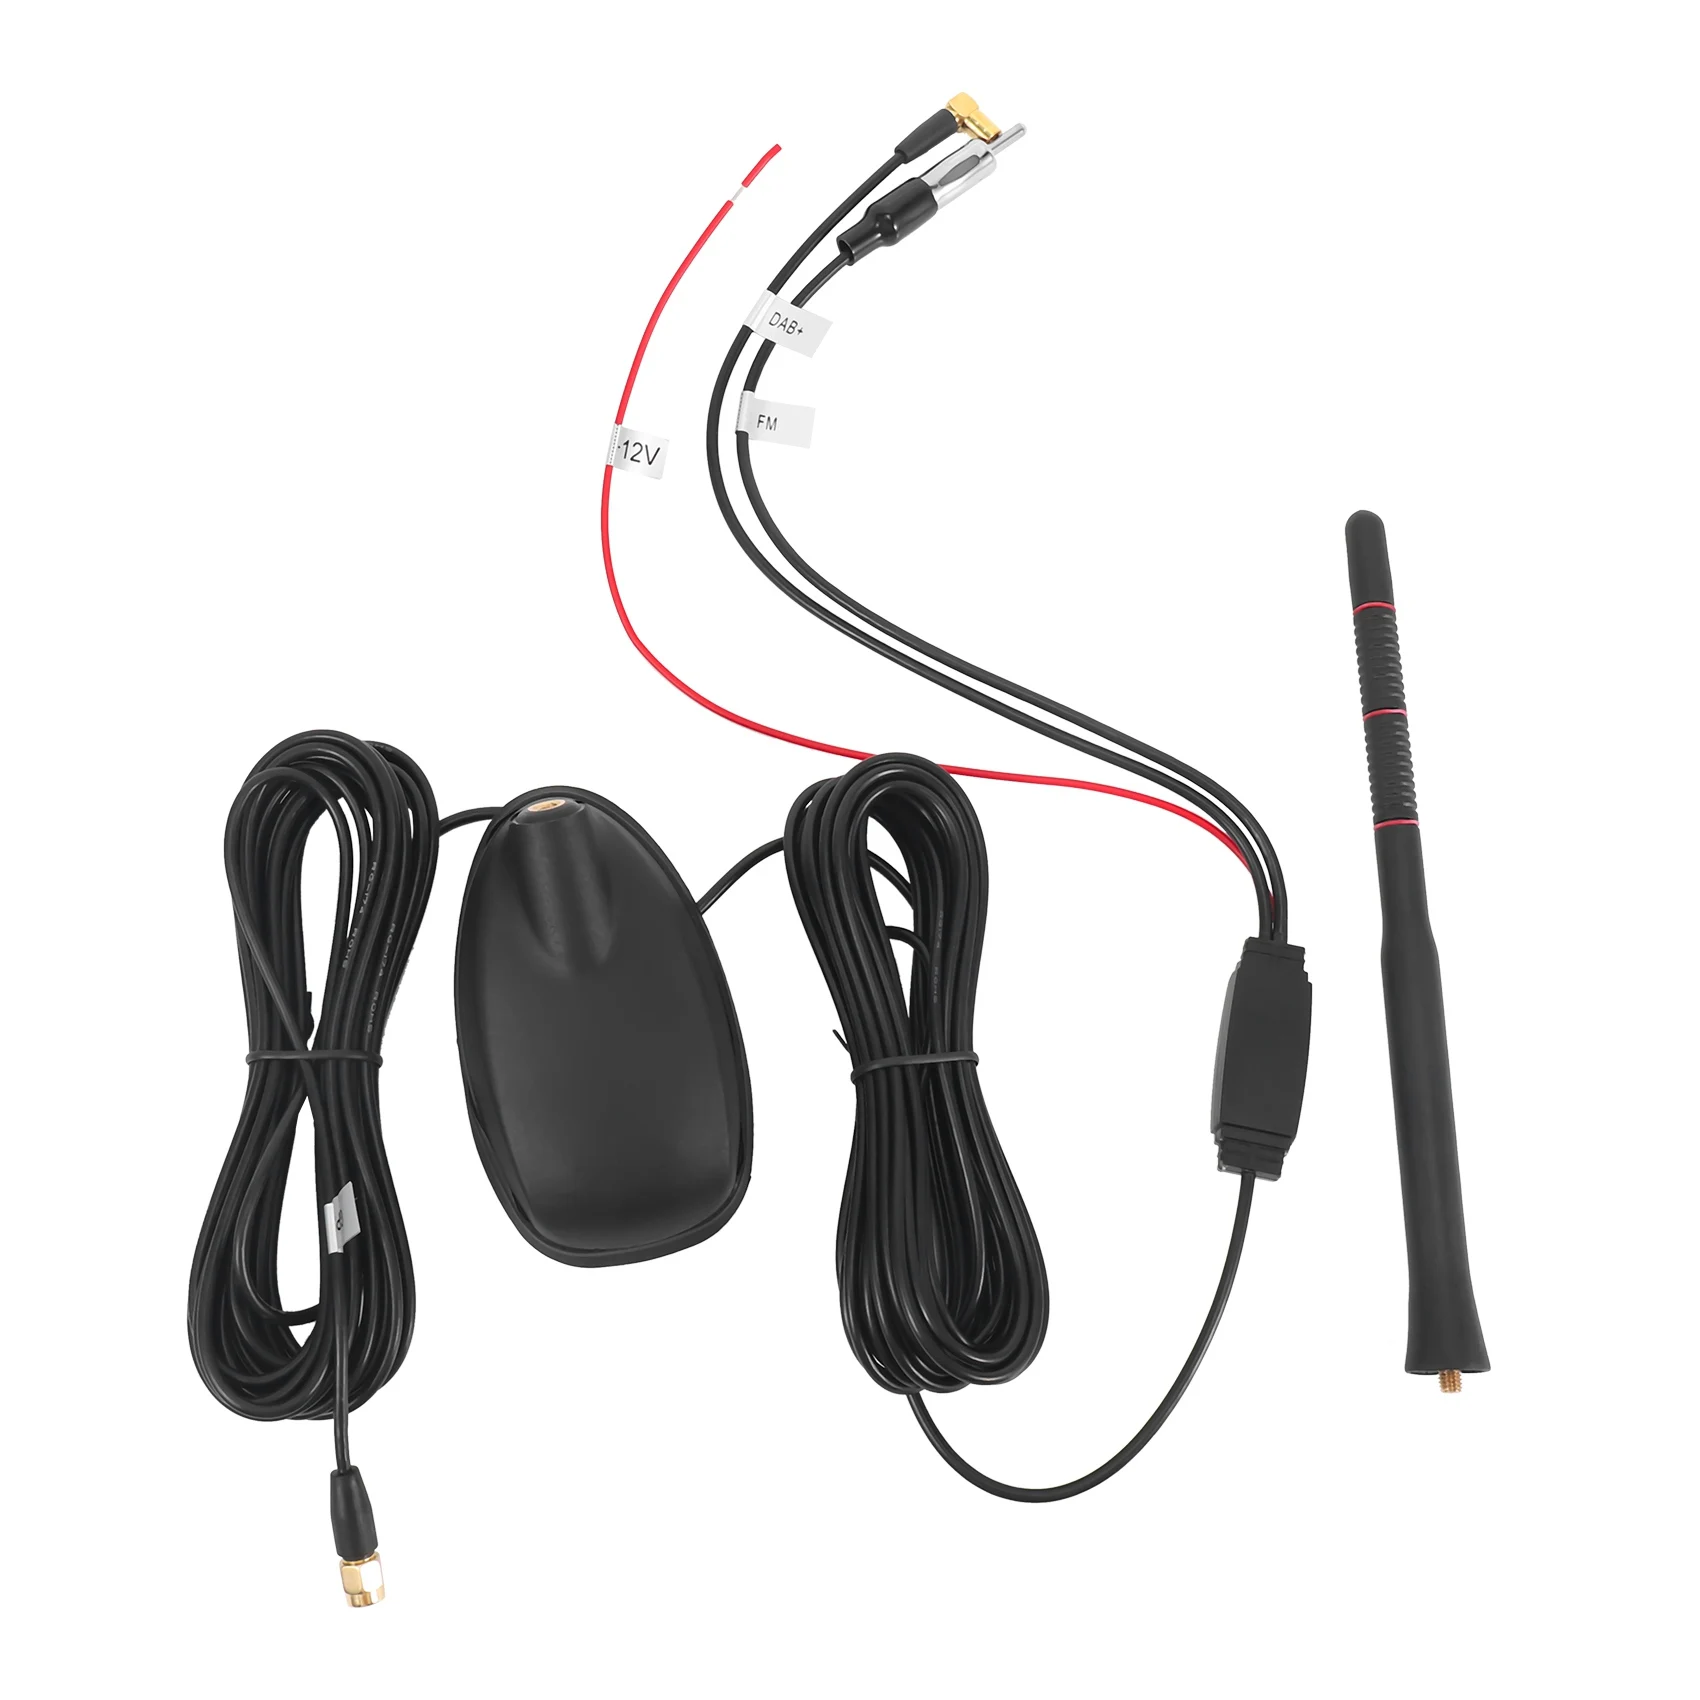 

Antenna Car Car Antenna DAB+GPS+FM Antenna Active Amplified Roof Mount Waterproof Dustproof Universal Auto Accessories